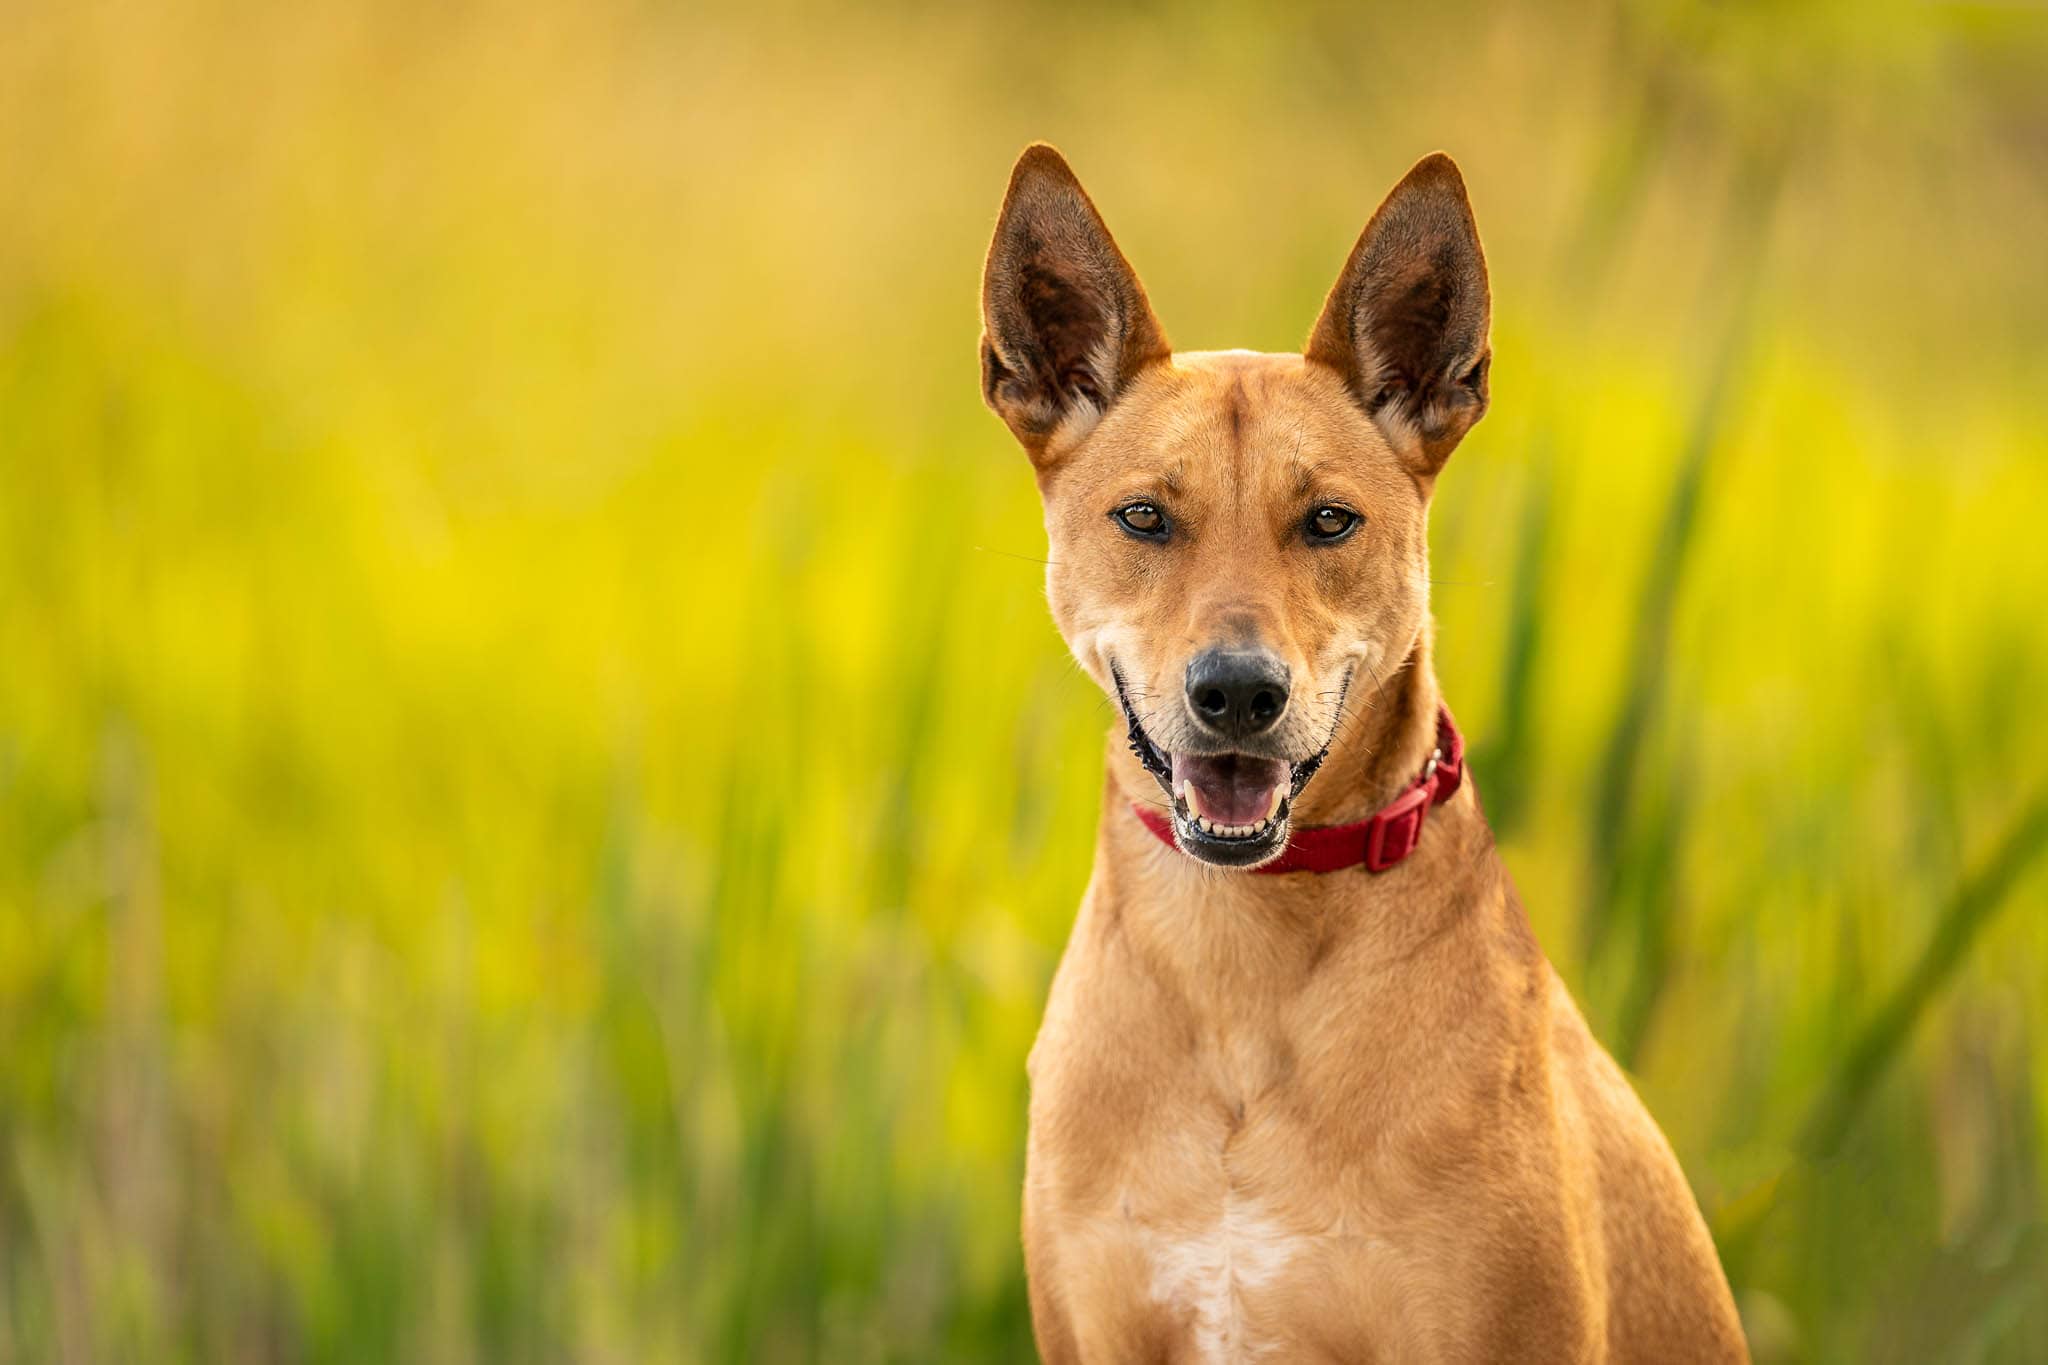 a Pharaoh Hound/Korean Jindo mixed breed dog sitting in tall grass, photographed in Prince's Island Park, Calgary, Alberta